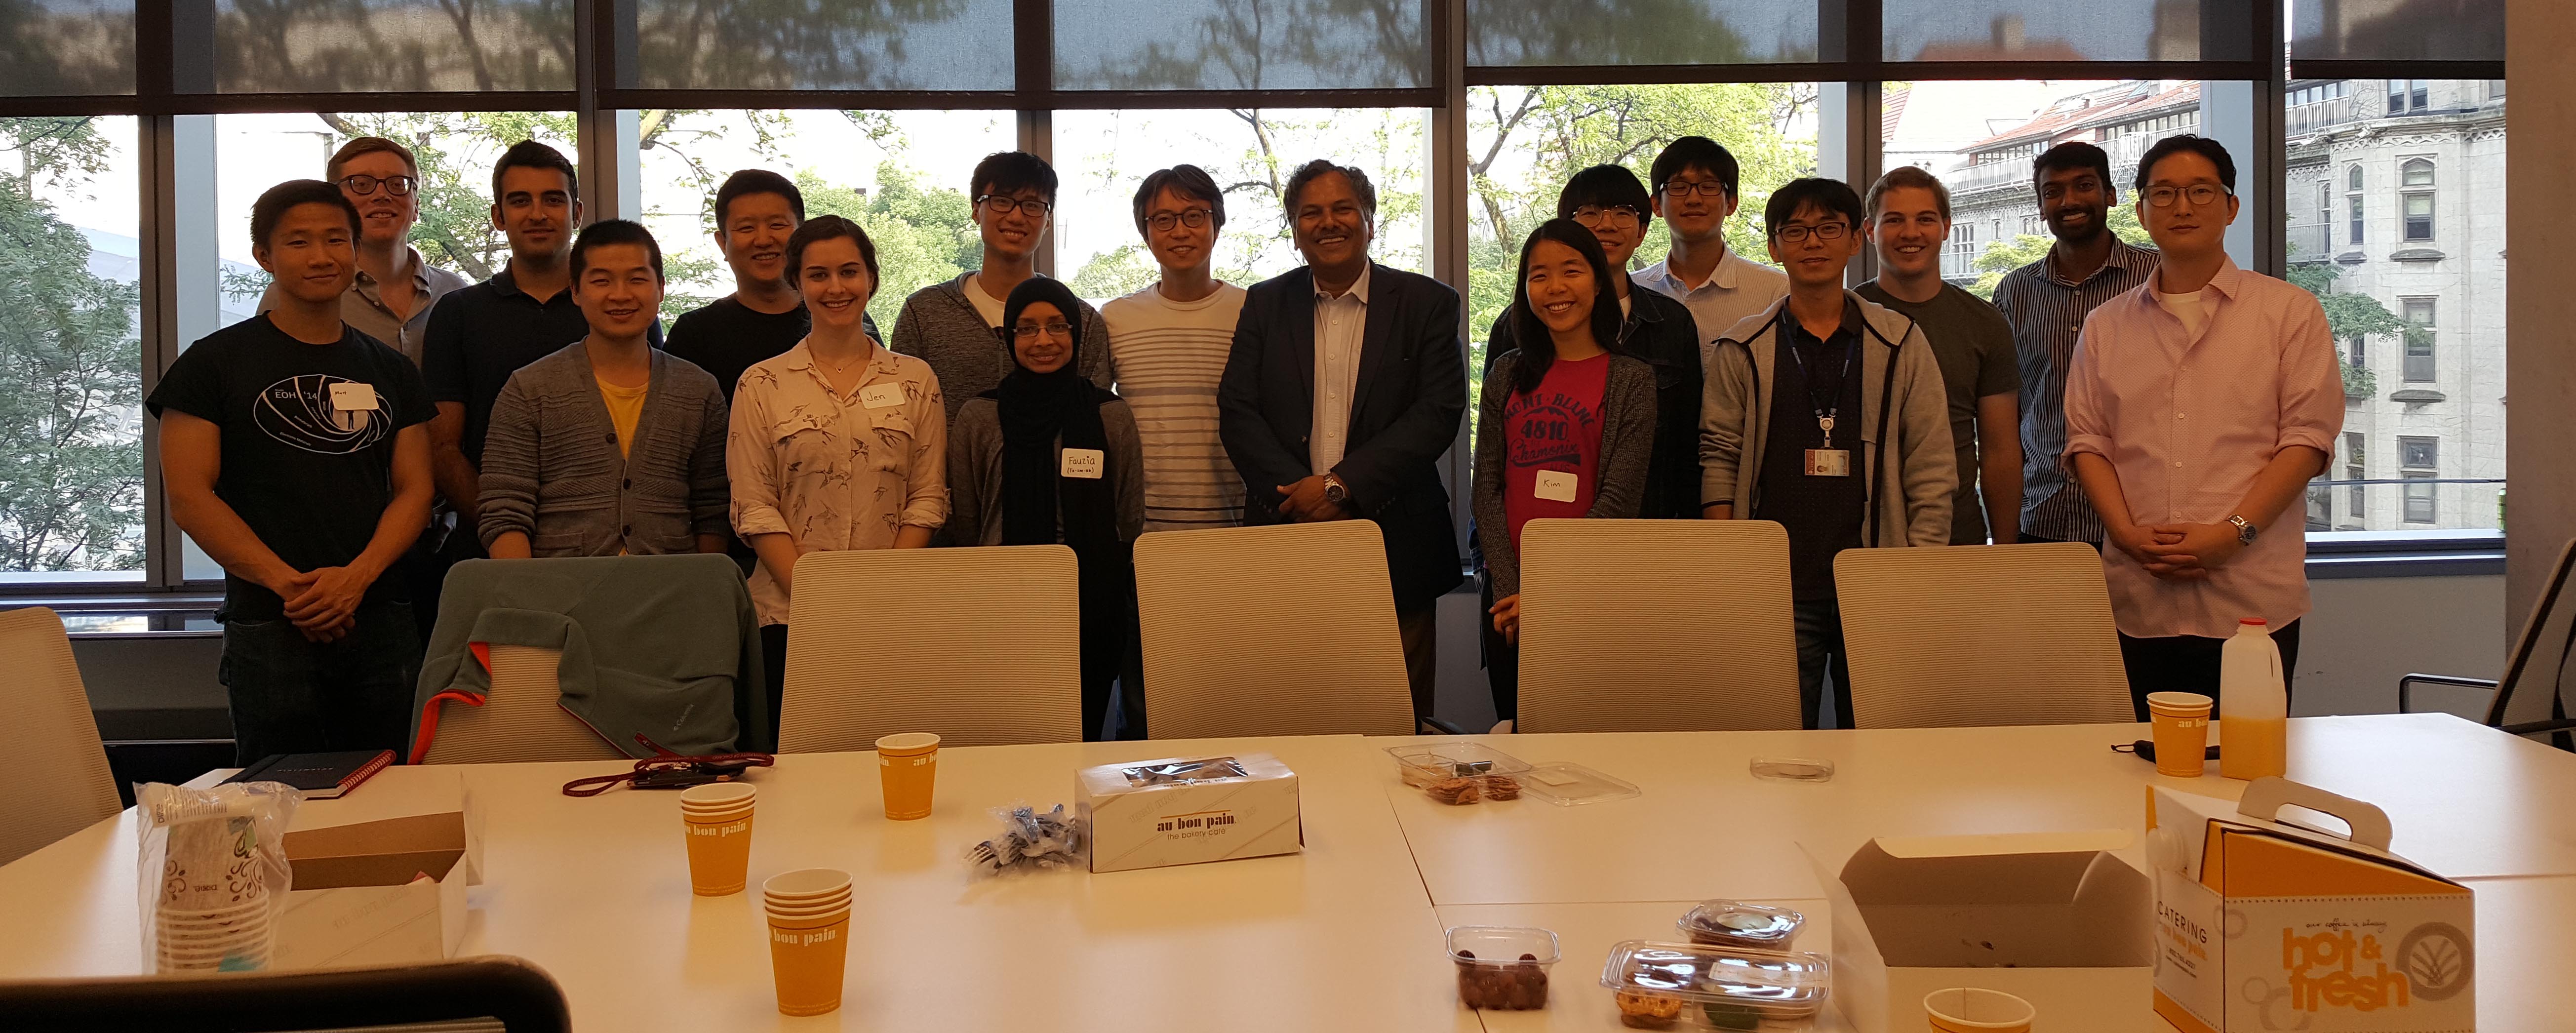 The Dravid and Park Groups pose together during their exchange at UChicago.